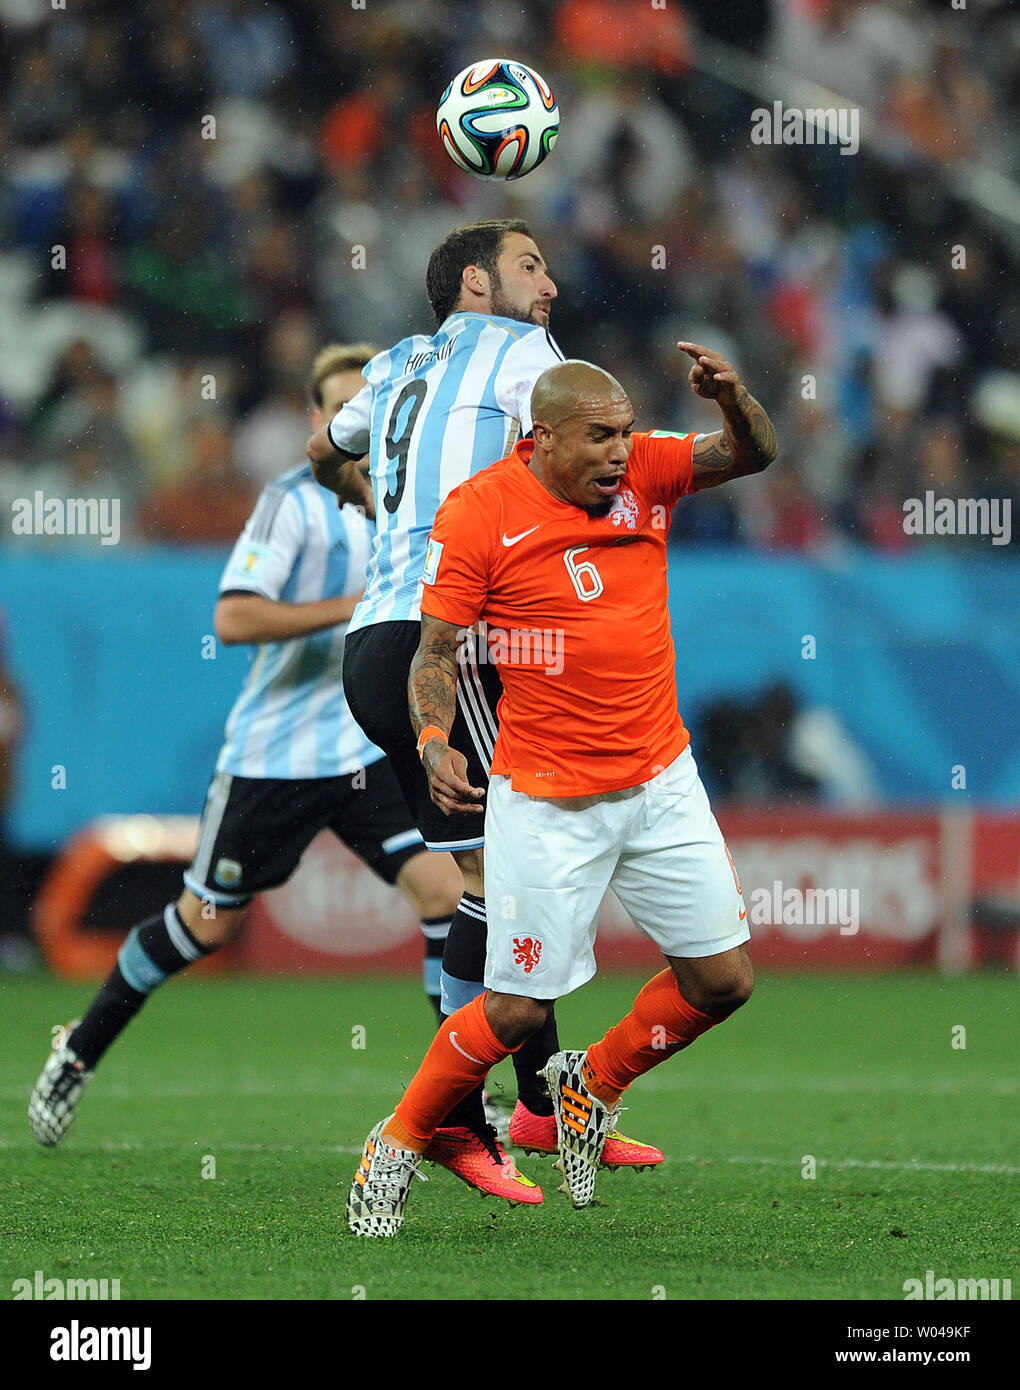 Nigel De Jong of the Netherlands competes with Gonzalo Higuain (L) of Argentina during the 2014 FIFA World Cup Semi Final match at the Arena Corinthians in Sao Paulo, Brazil on July 09, 2014. UPI/Chris Brunskill Stock Photo